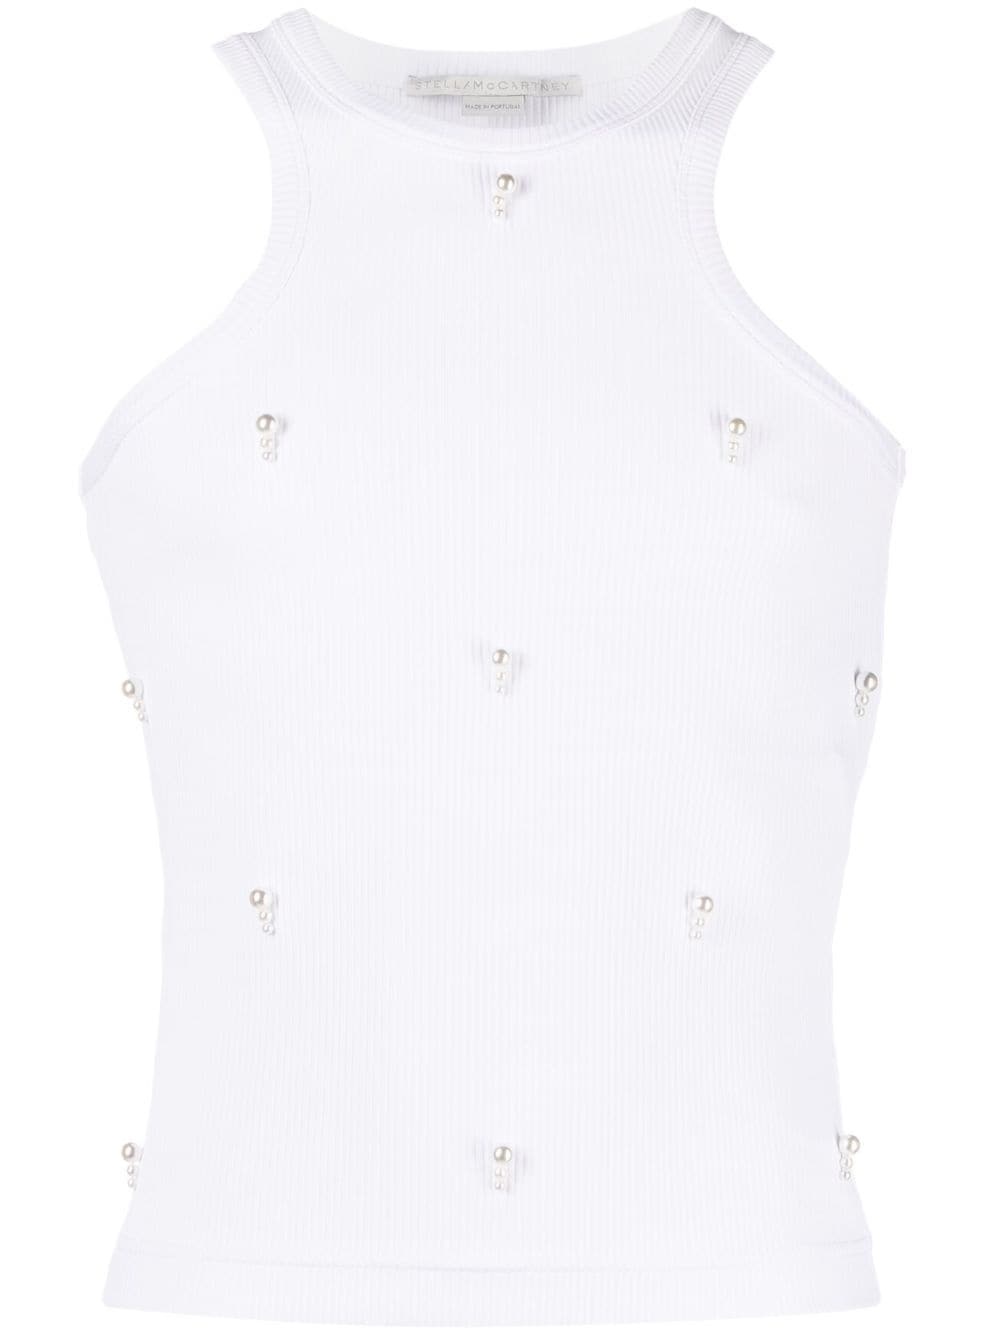 pearl-embroidered racerfront tank top - 1